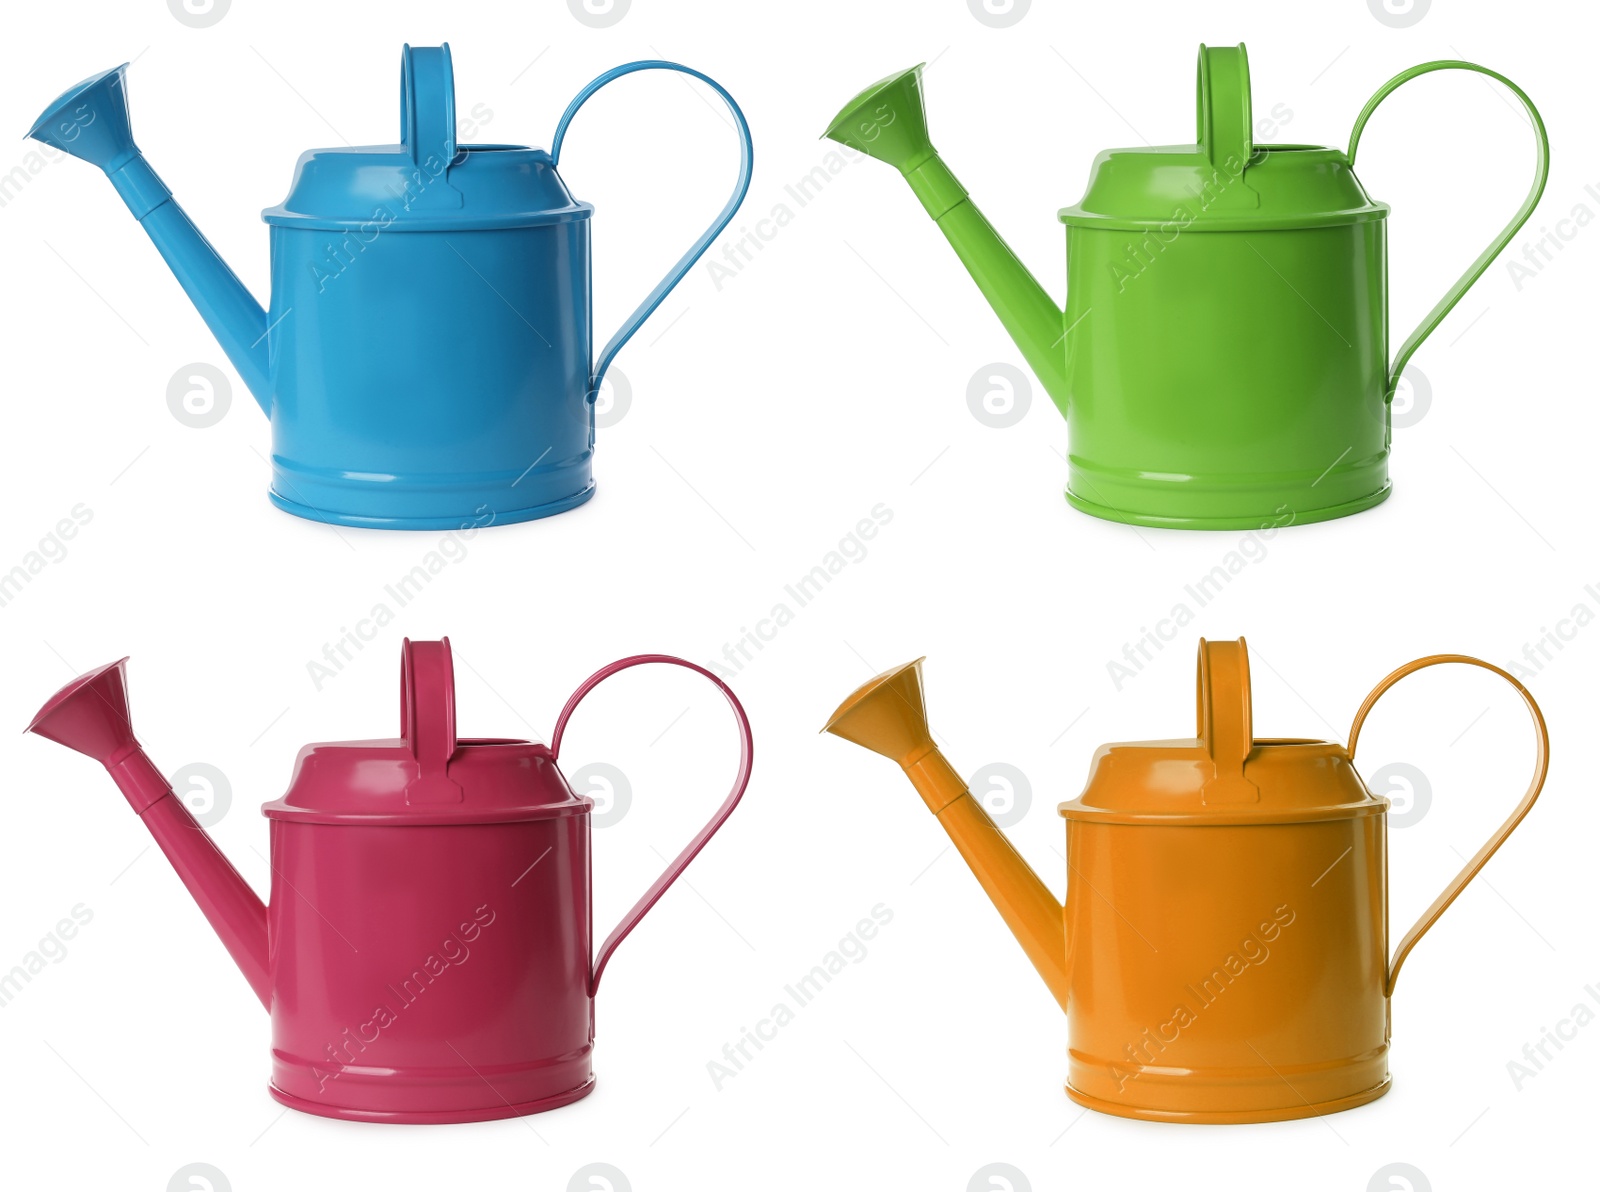 Image of Set with different watering cans on white background